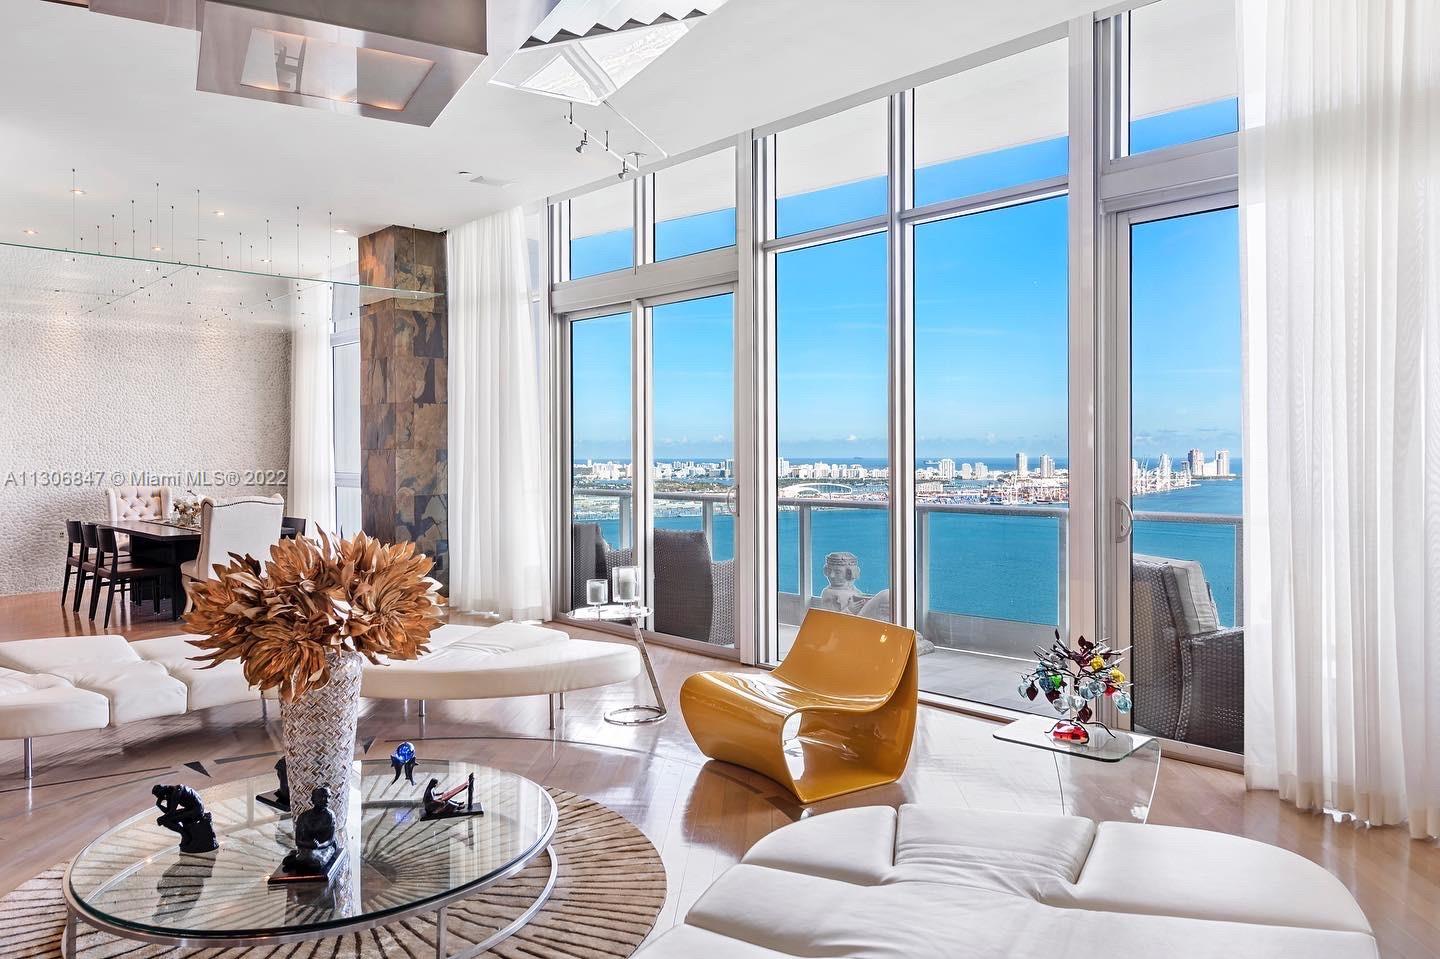 Impressive 4 bedrooms bayfront residence fully furnished in one of the most private & renowned buildings in the city Jade Brickell. 14ft tall ceilings, top of the line appliances, flow-thru floorplan which includes a media room, a bar, formal dining room, 2 terraces (ocean and city views), office & extensive master bedroom walk-in closet.  Wooden floors throughout the unit, iconic decoration with stylish highend finishes.